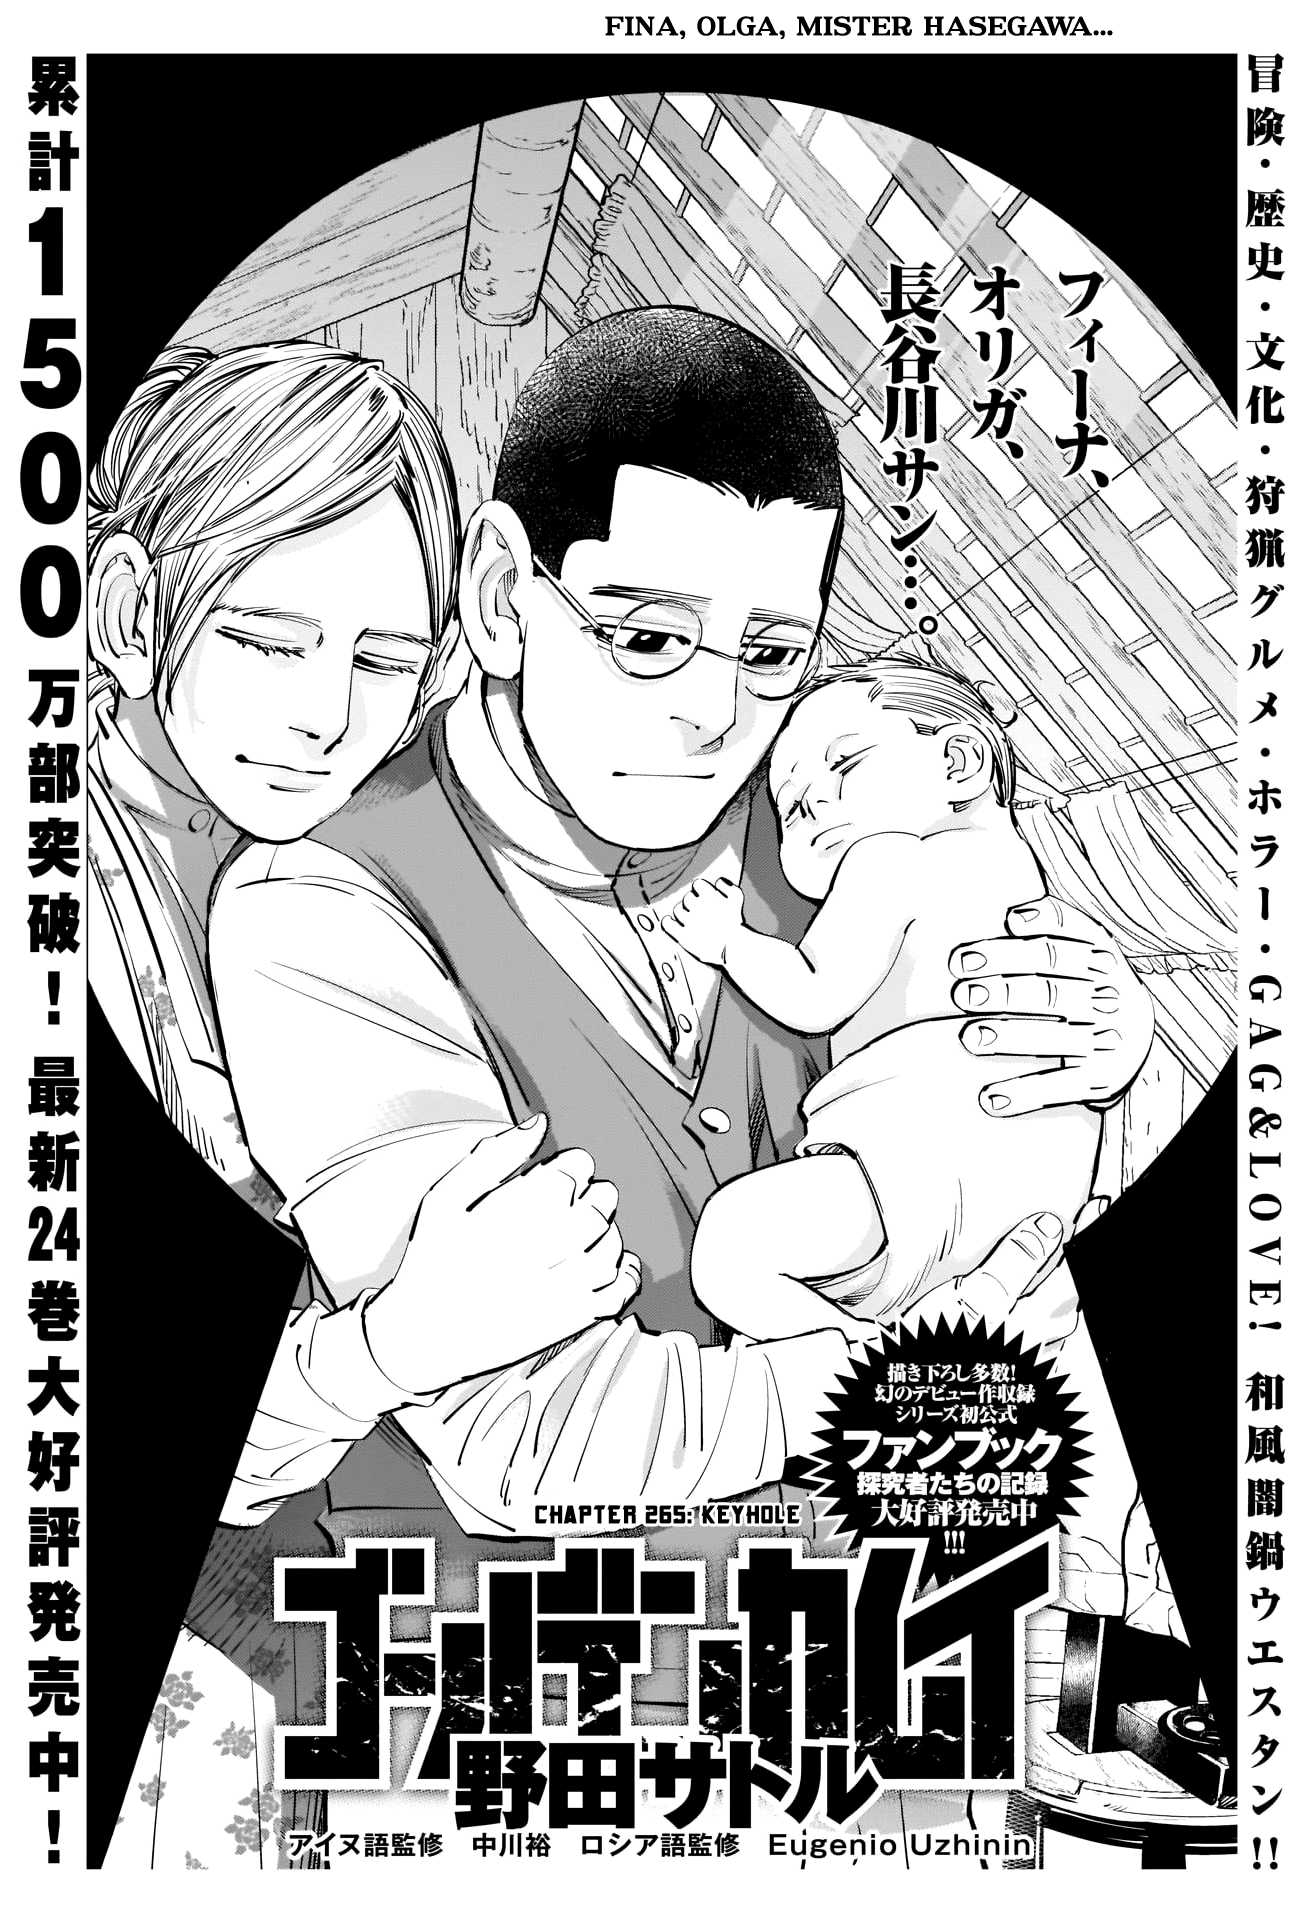 Golden Kamui Chapter 265: Keyhole - Picture 1